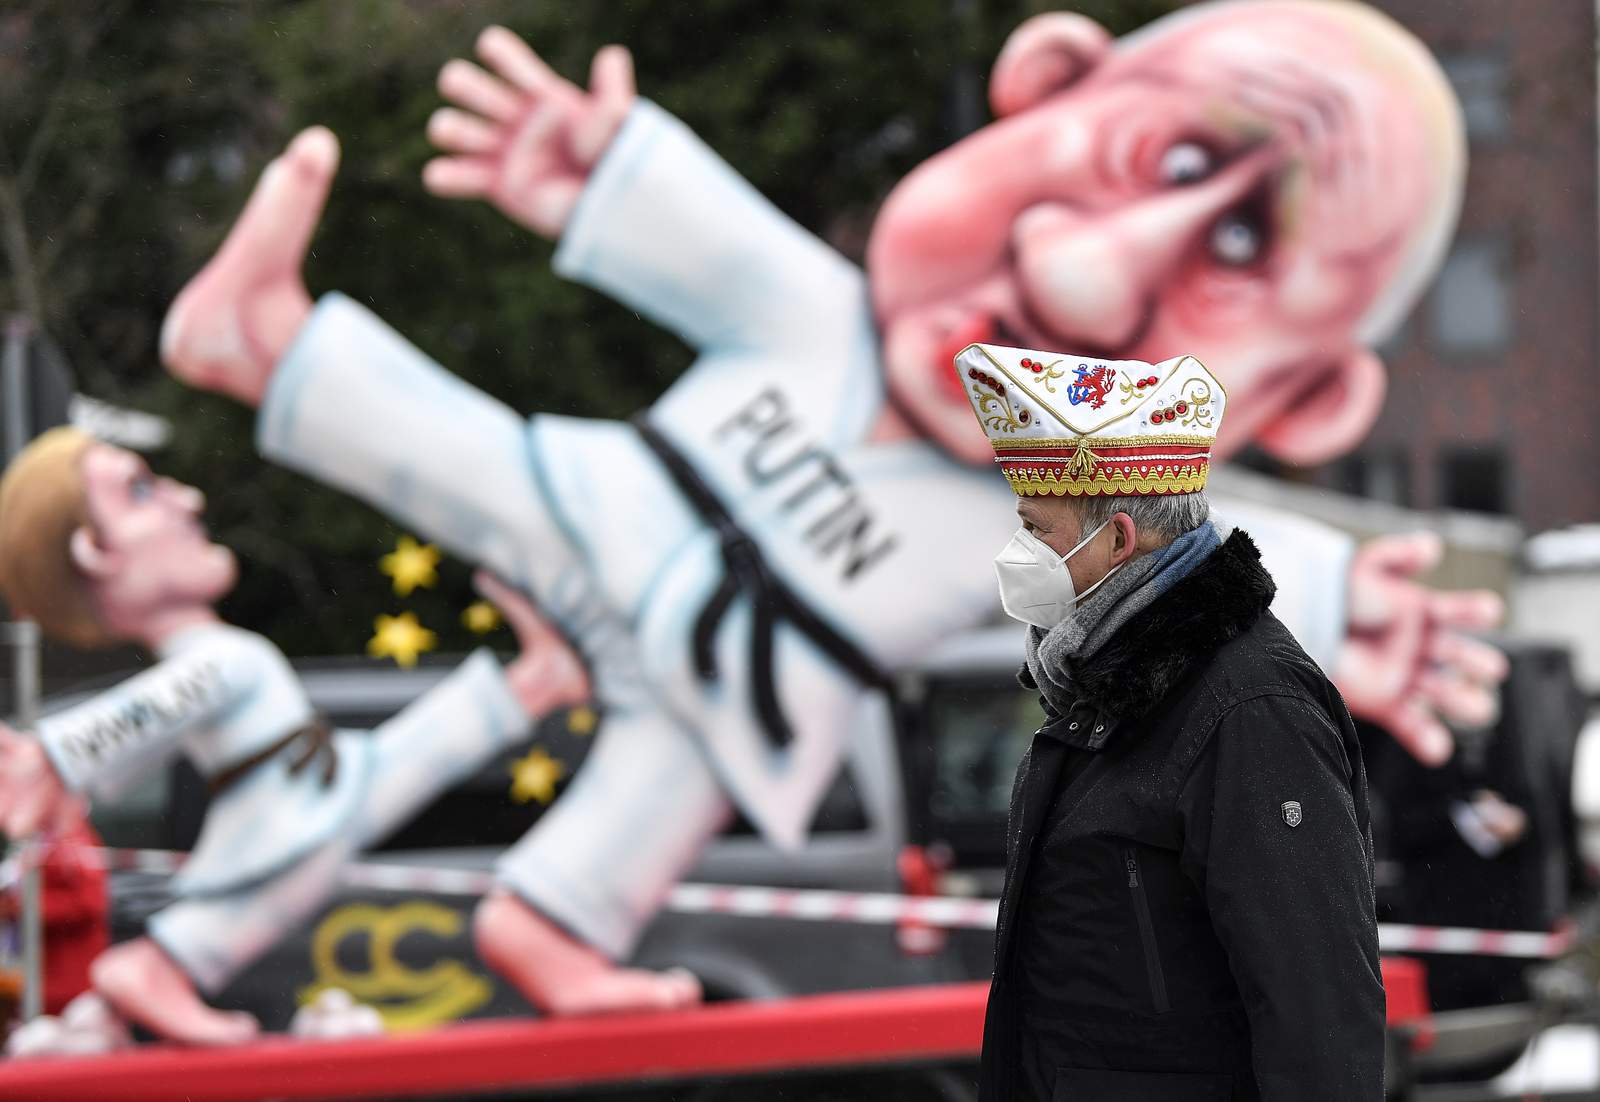 Germany ekes some fun out of a quiet Carnival